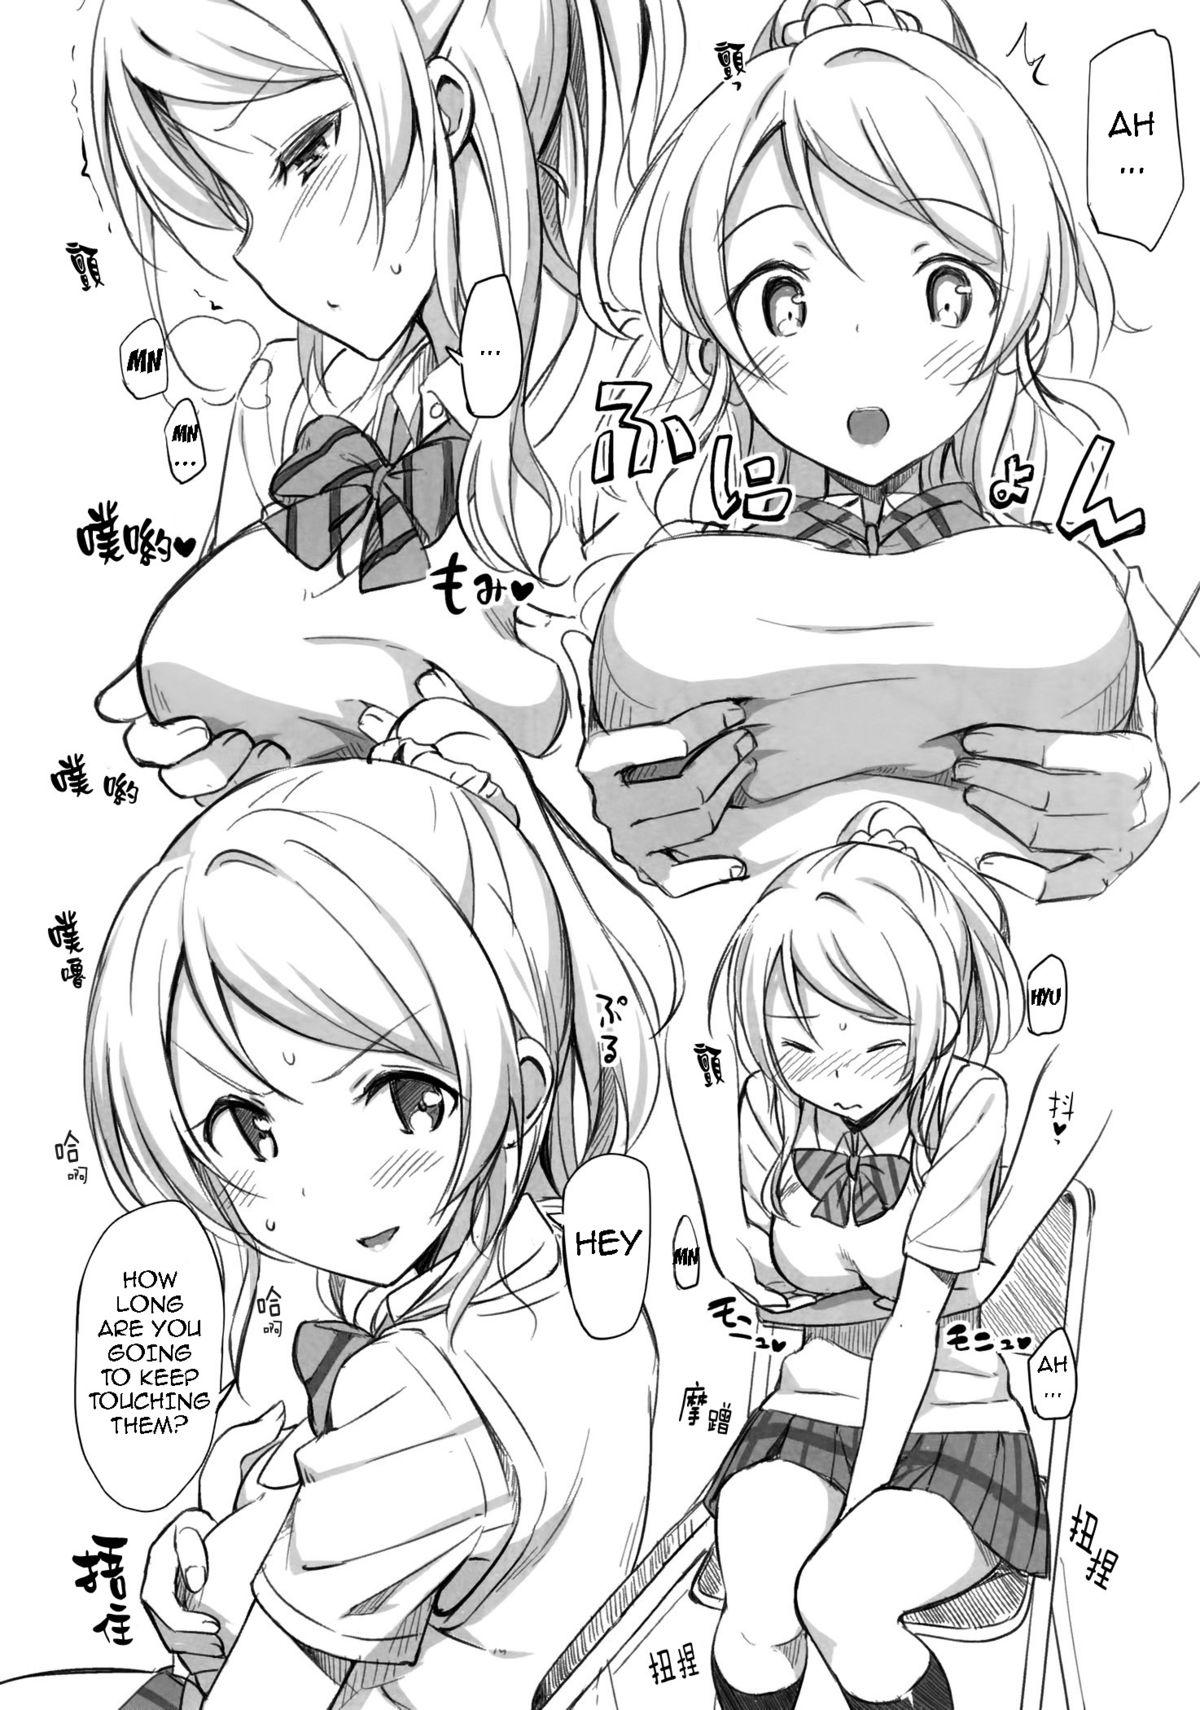 Footfetish School ldol Off-shot - Love live Mouth - Page 5